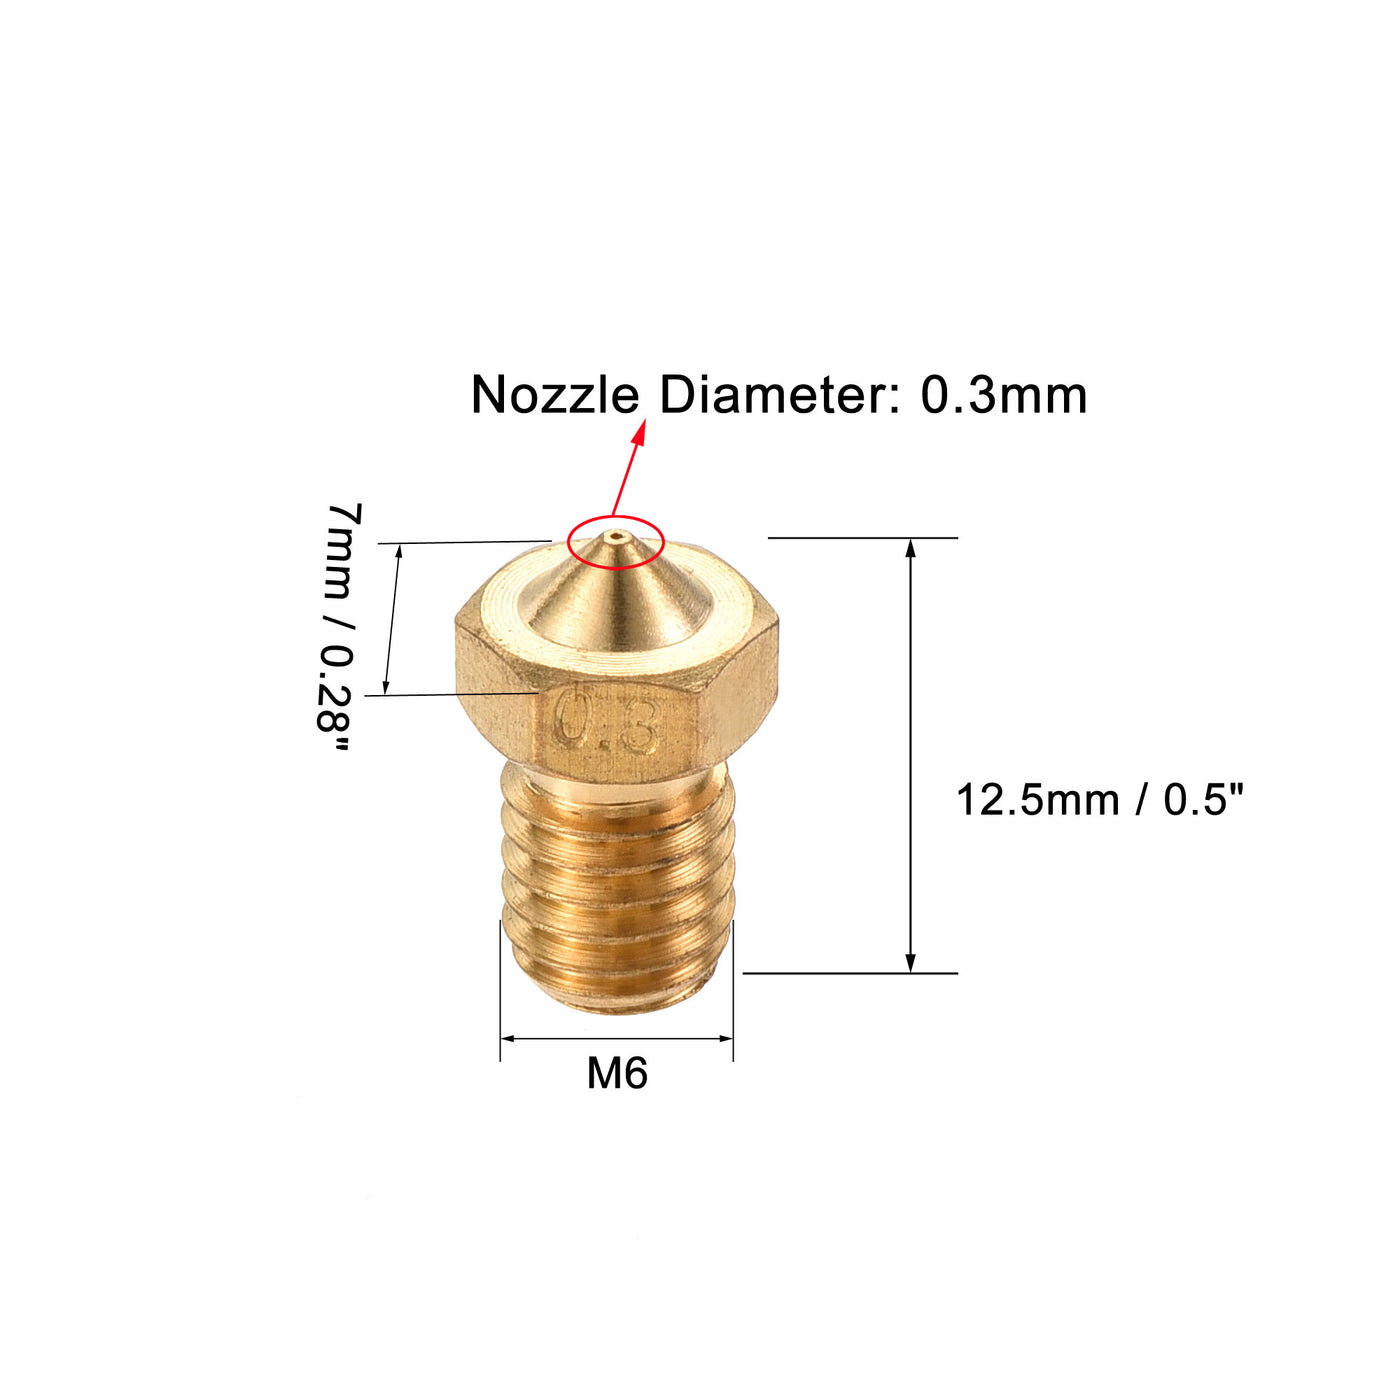 uxcell Uxcell 0.3mm 3D Printer Nozzle, 20pcs M6 Thread for V5 V6 3mm Extruder Print, Brass